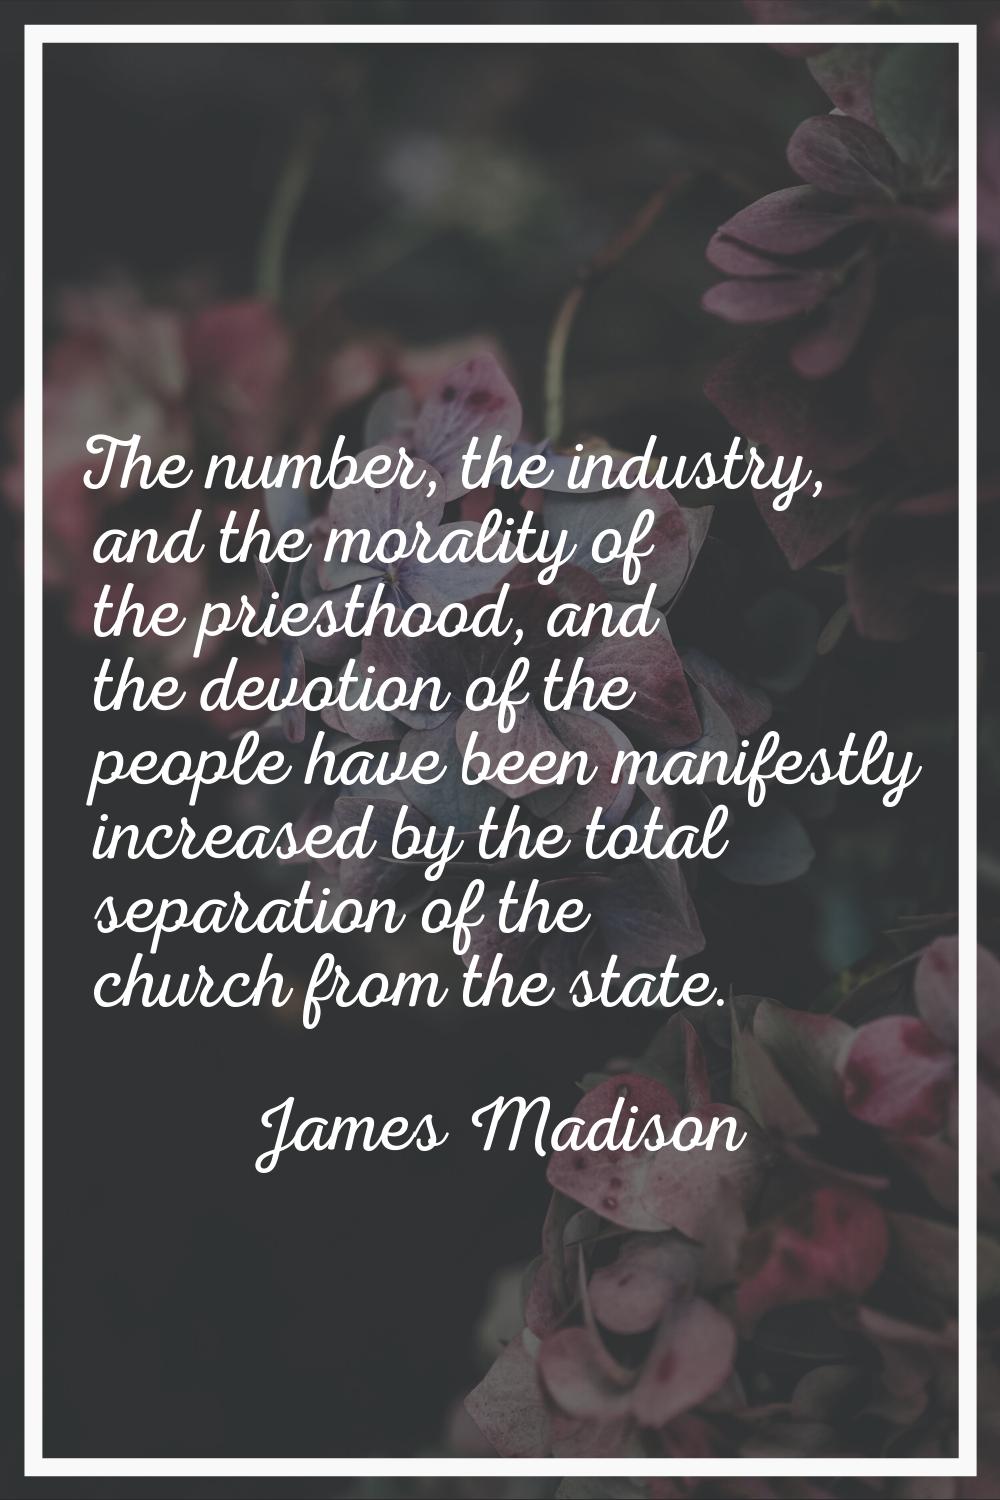 The number, the industry, and the morality of the priesthood, and the devotion of the people have b